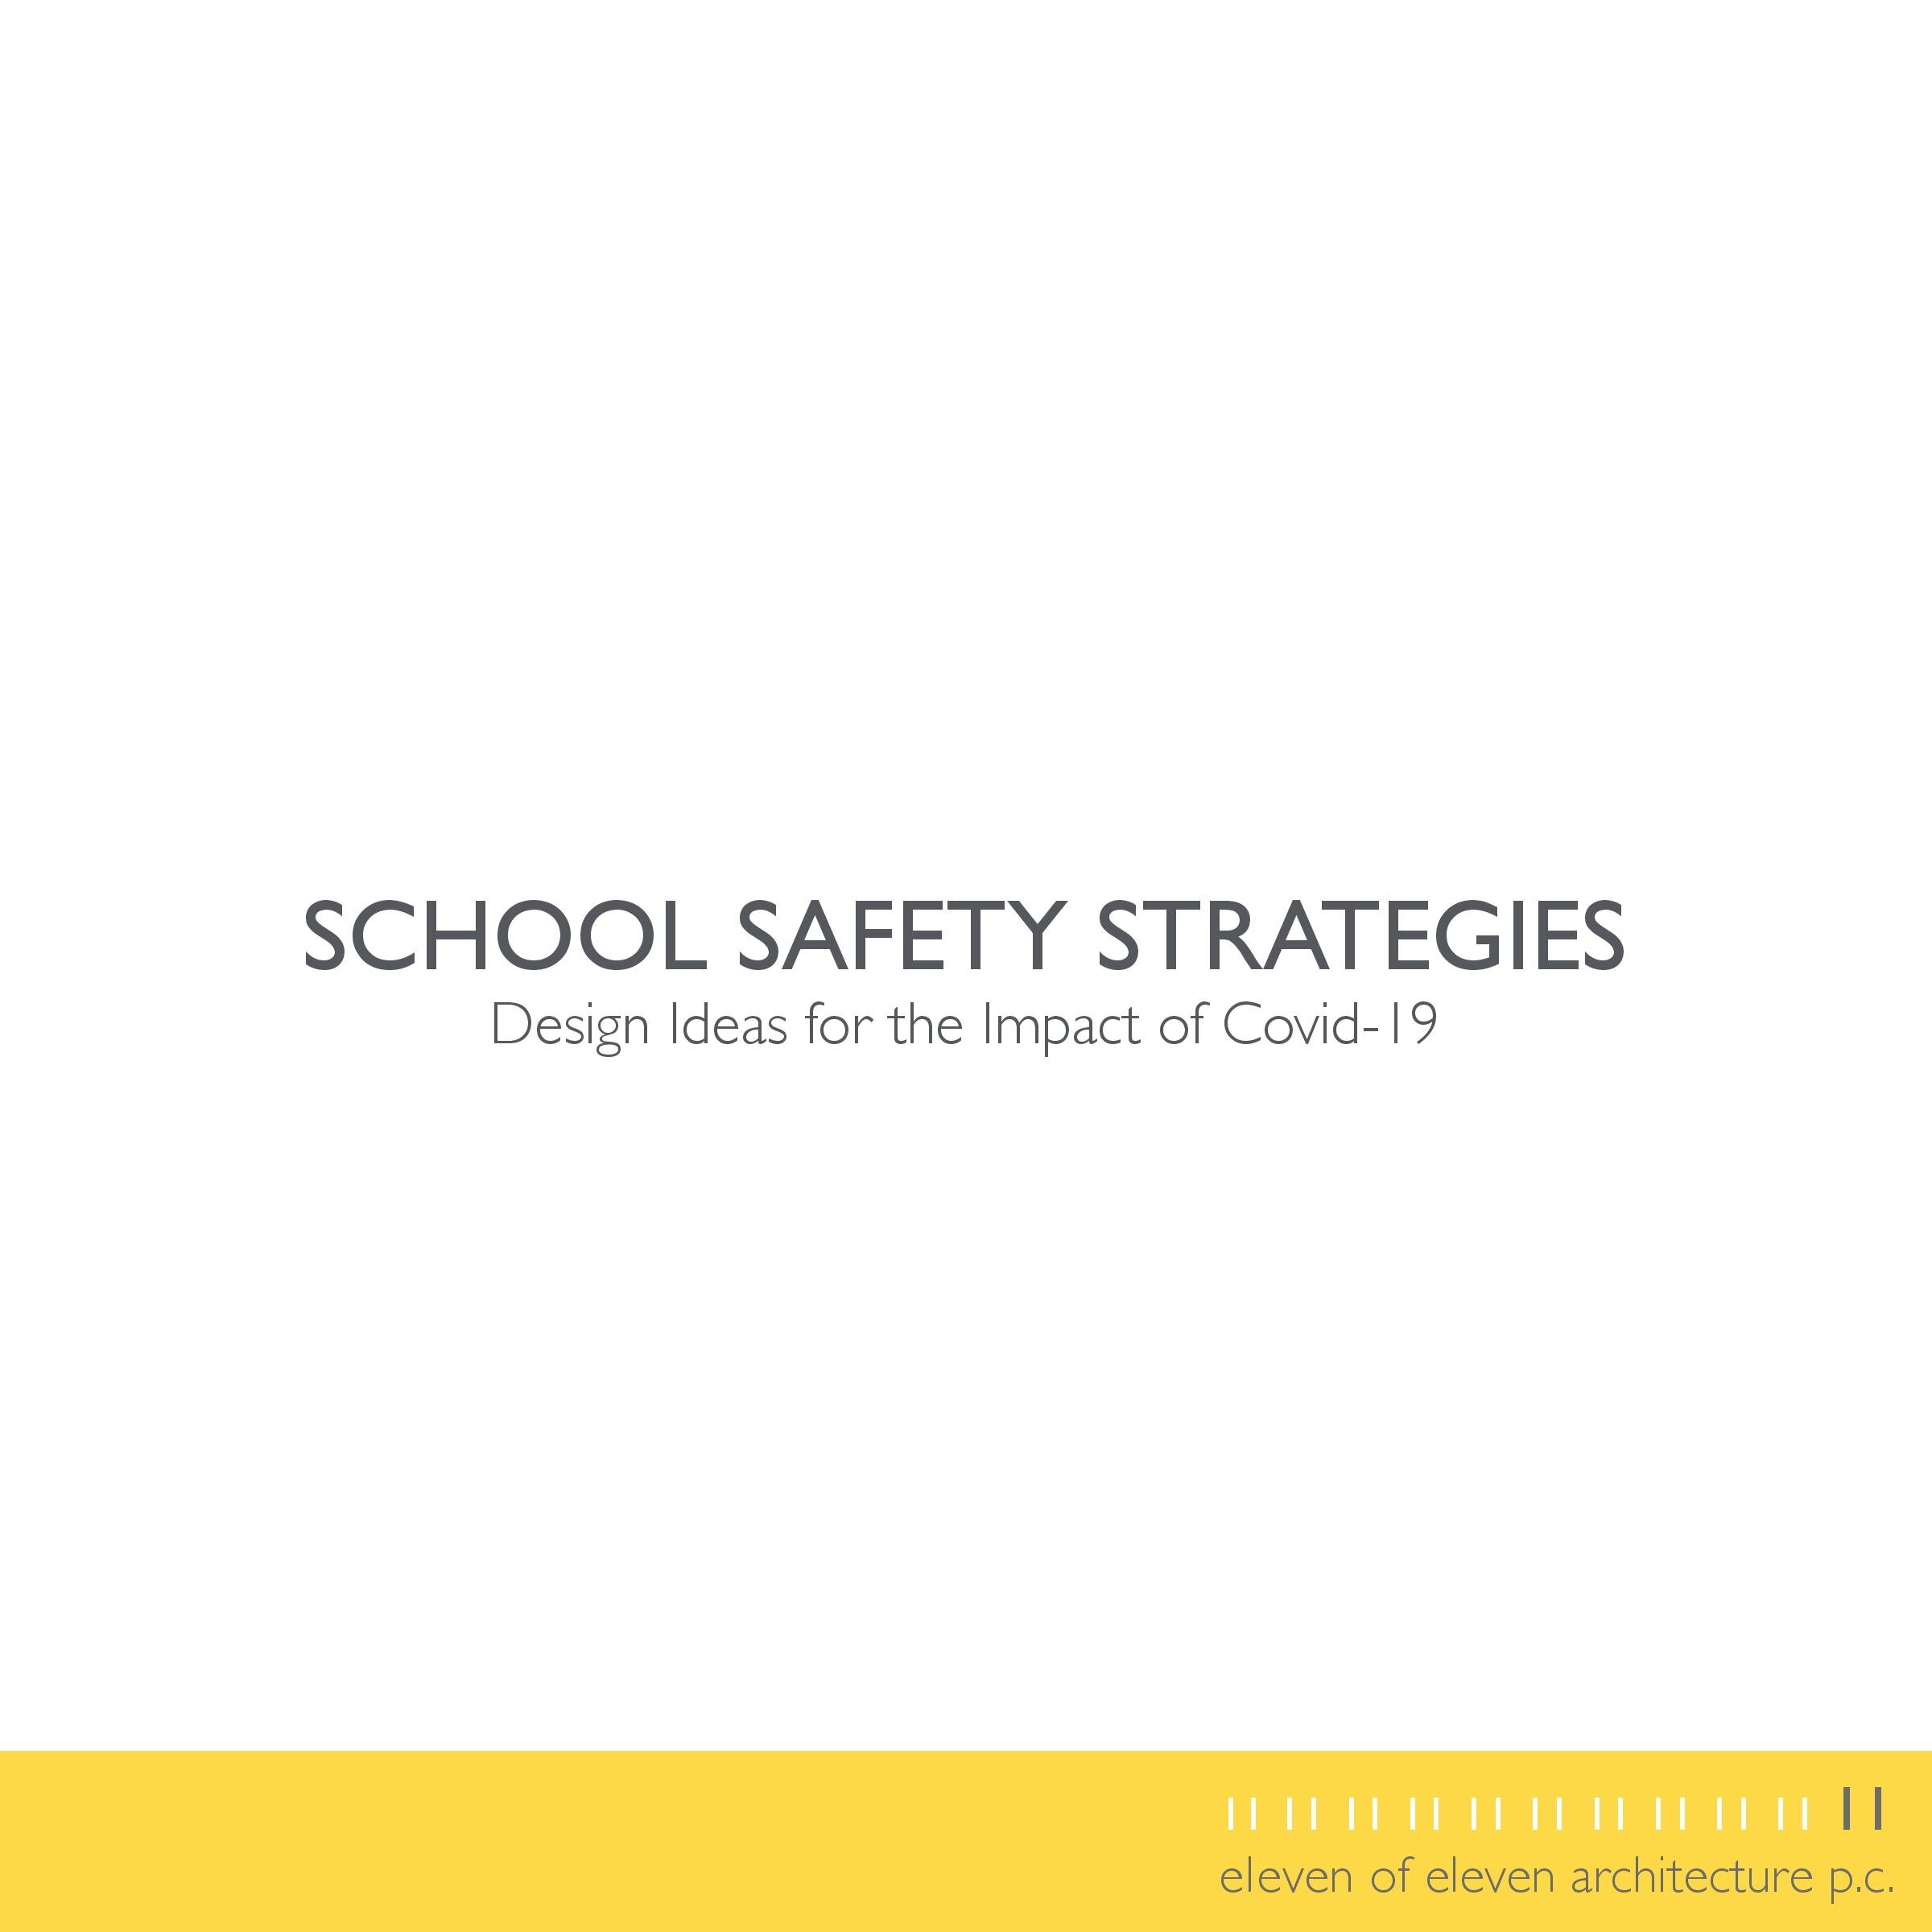 School Safety Strategies - Design Ideas for Impact of Covid-19-page-001.jpg